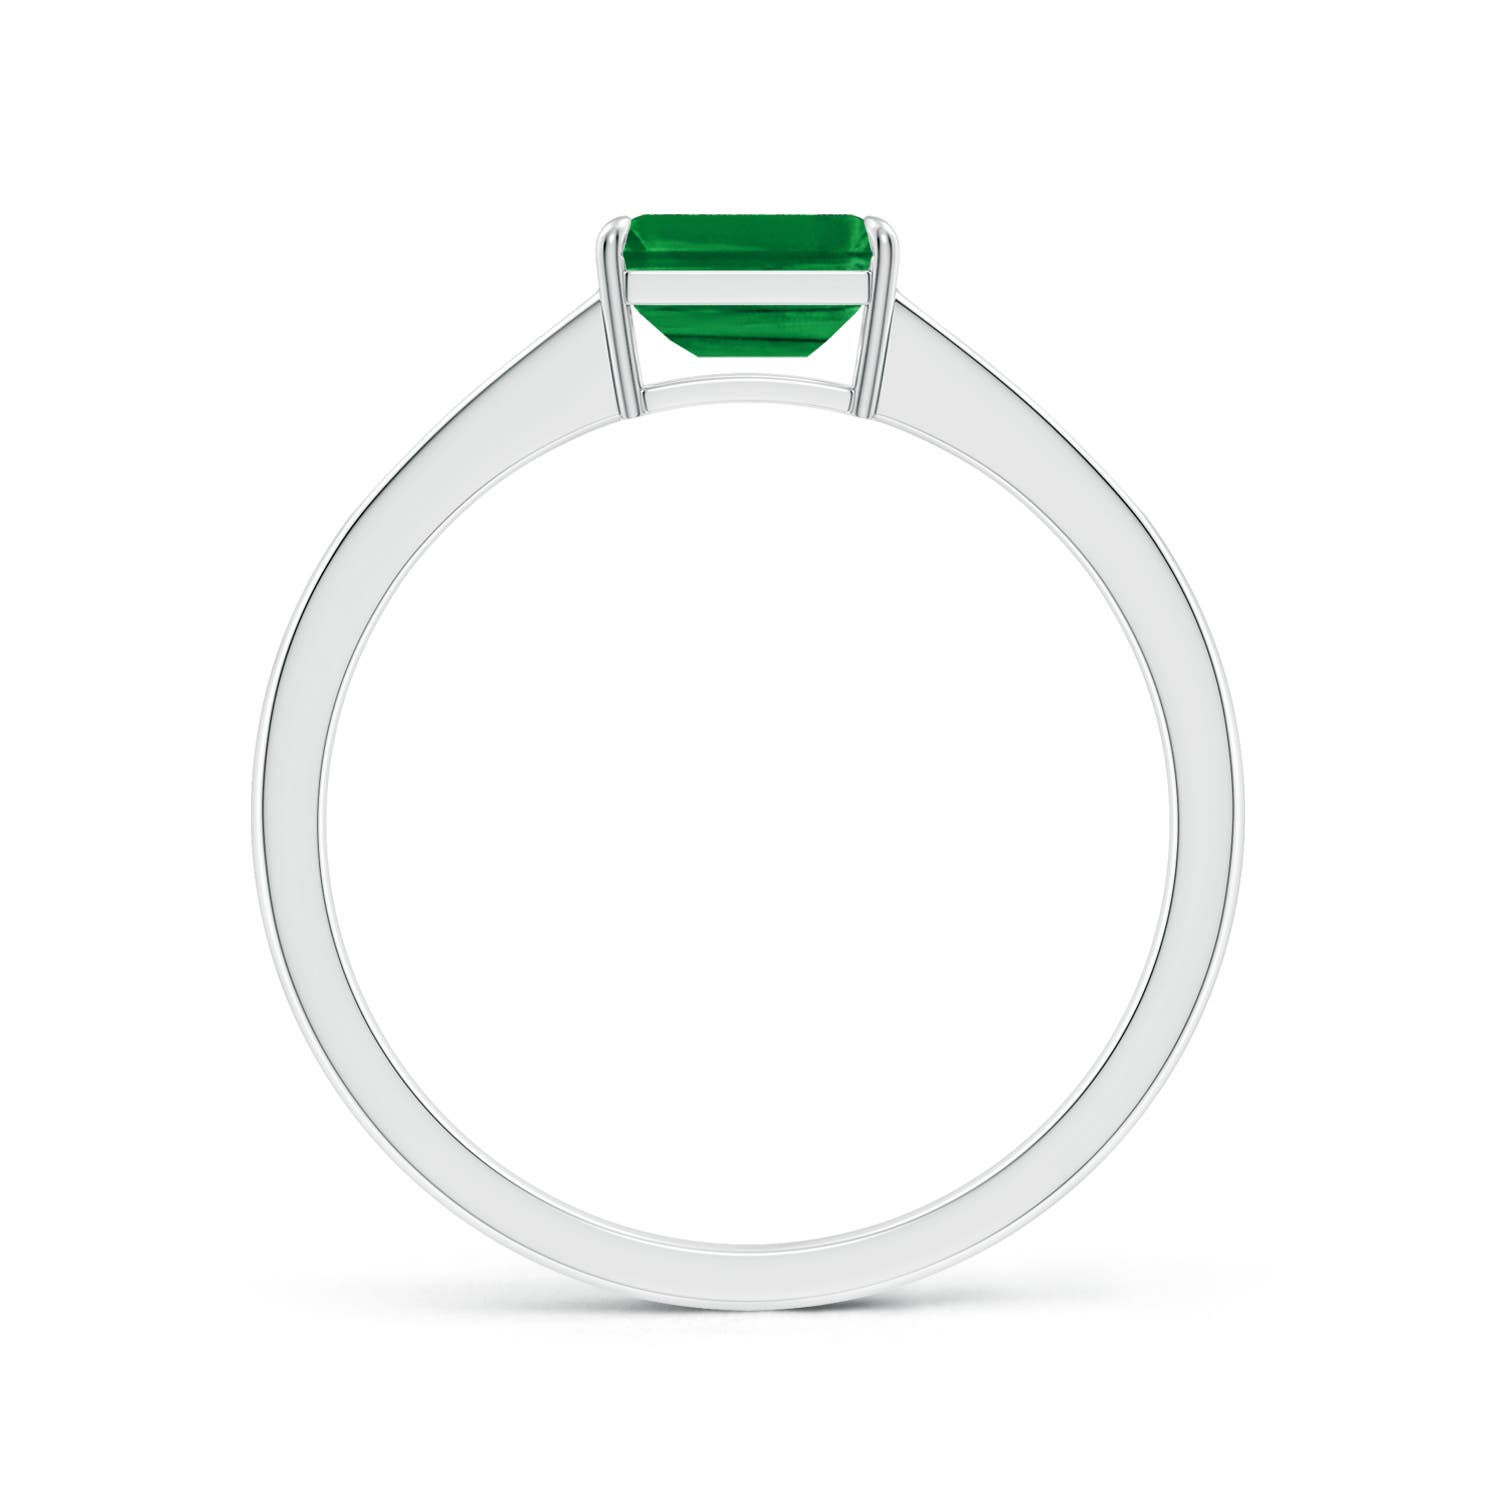 AAA - Emerald / 0.61 CT / 14 KT White Gold